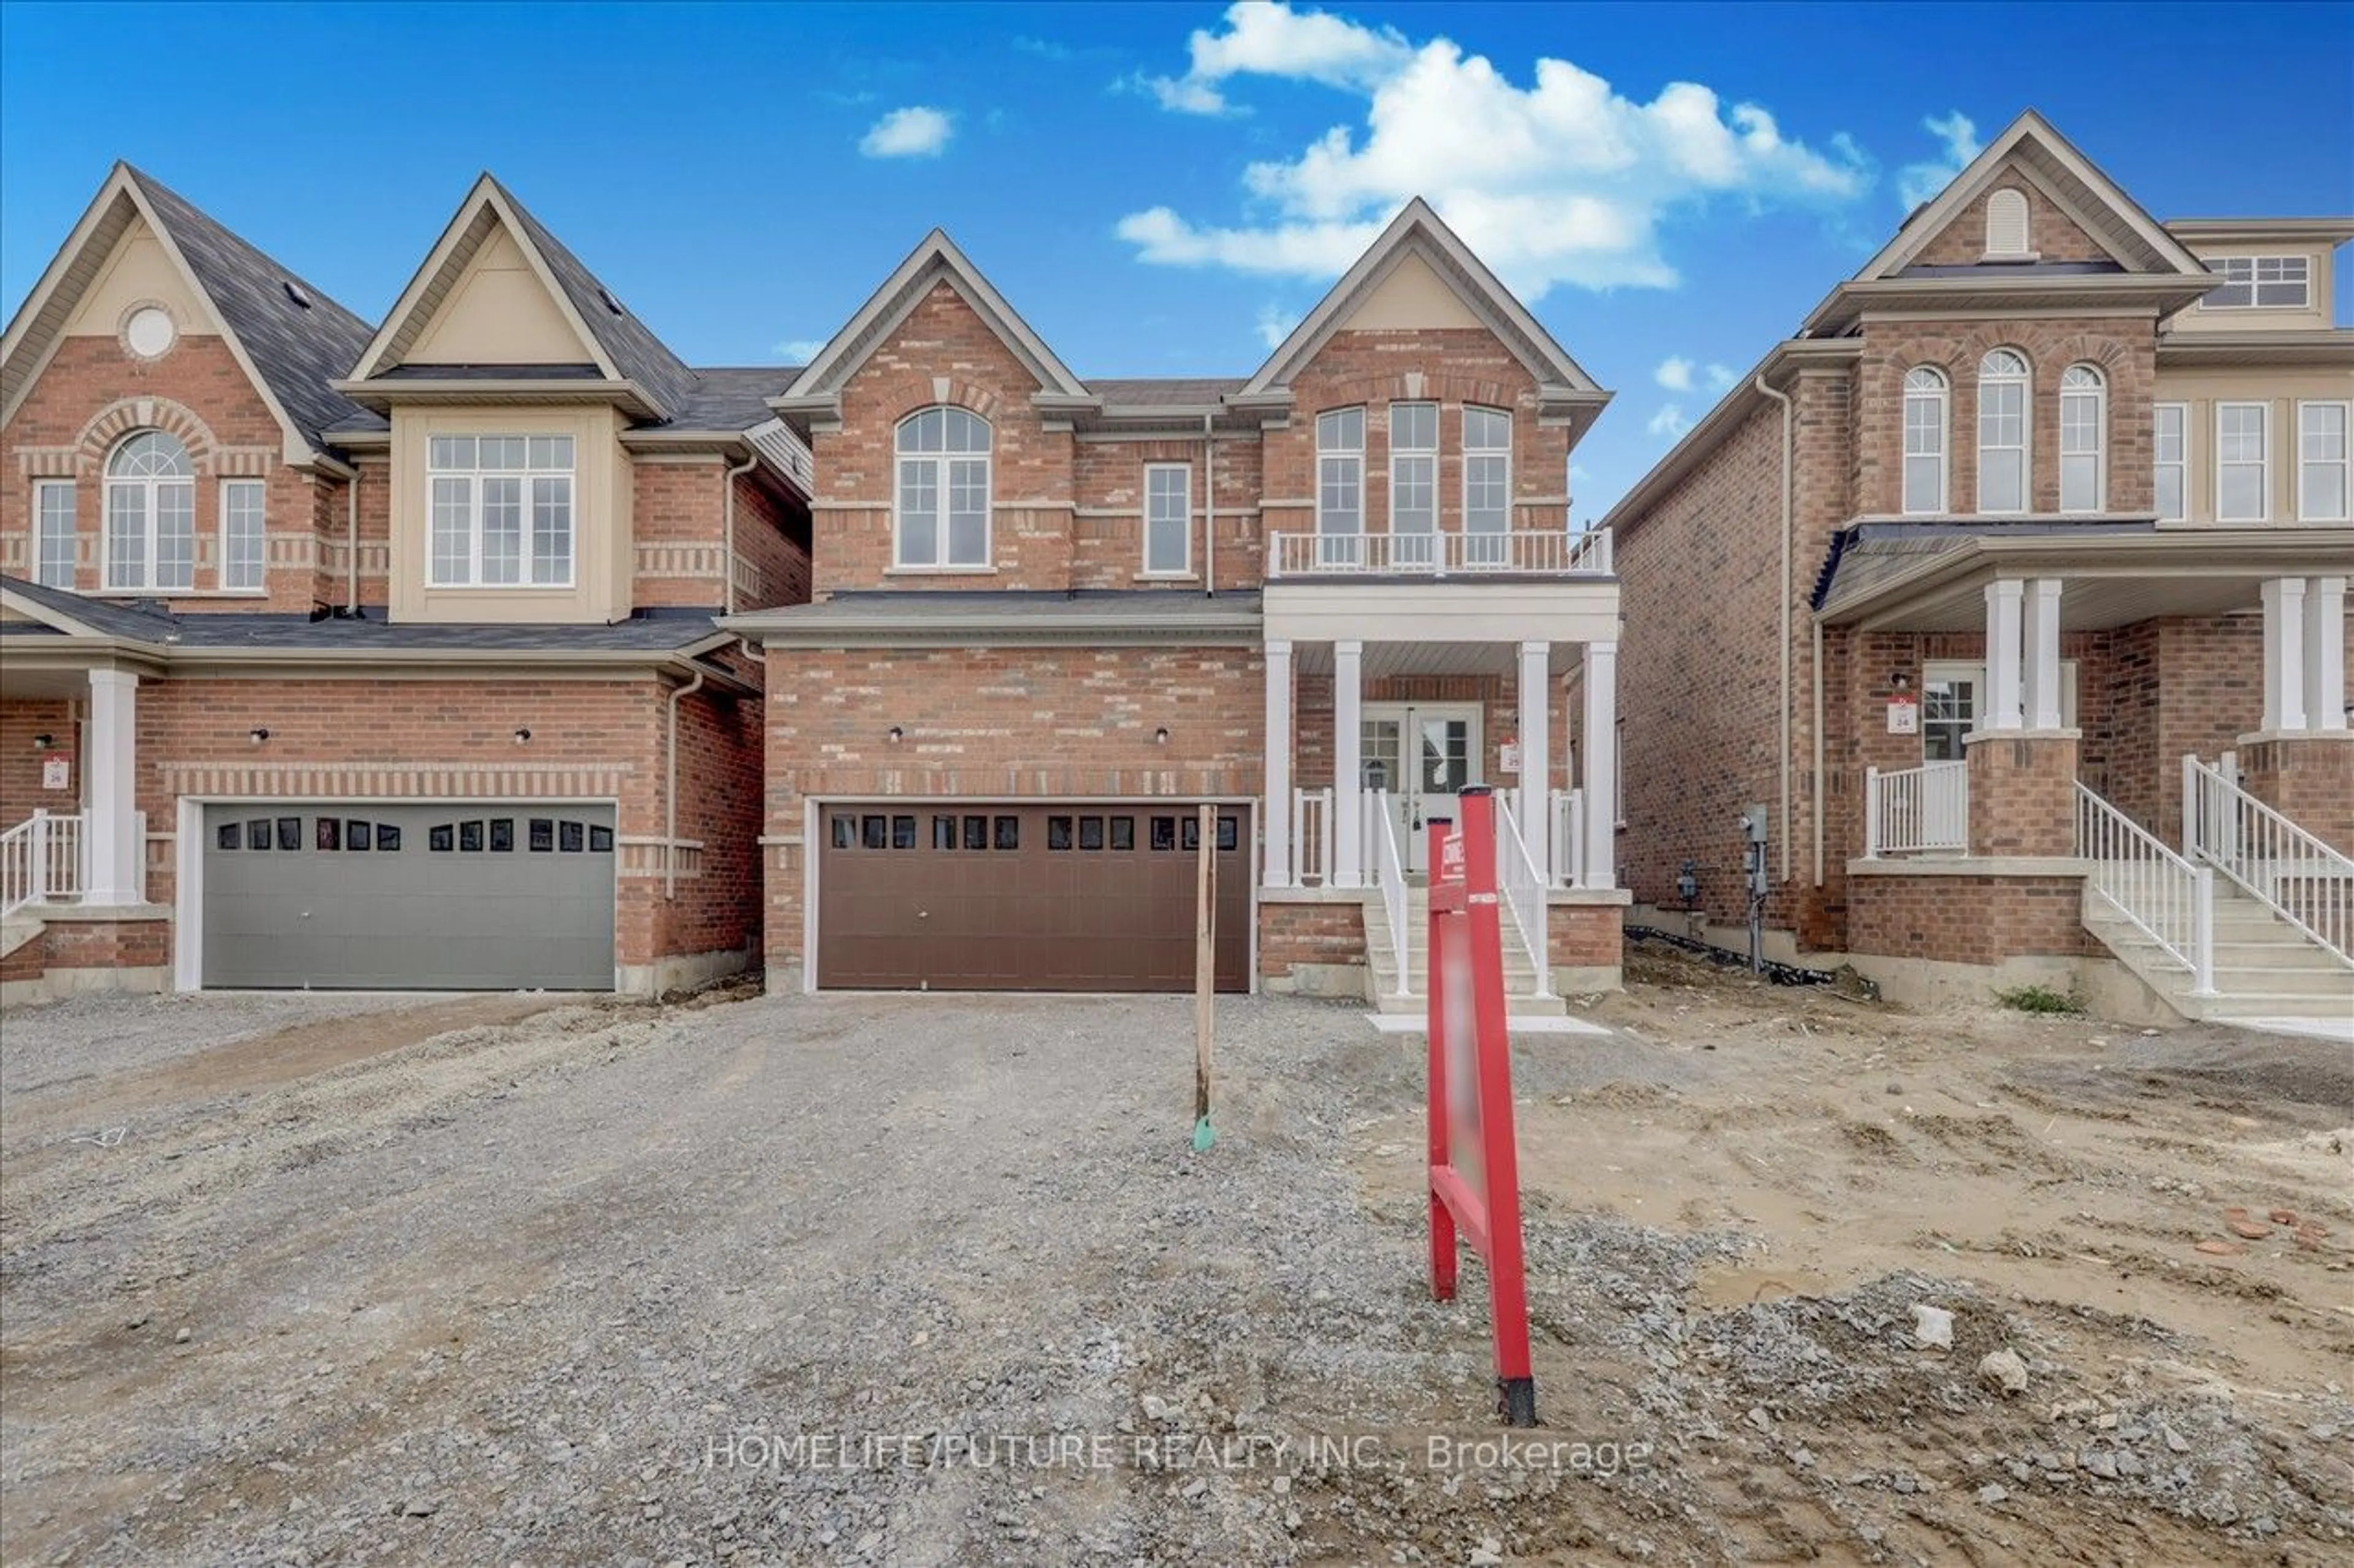 Home with brick exterior material for 1213 Drinkle Cres, Oshawa Ontario L1K 0A2